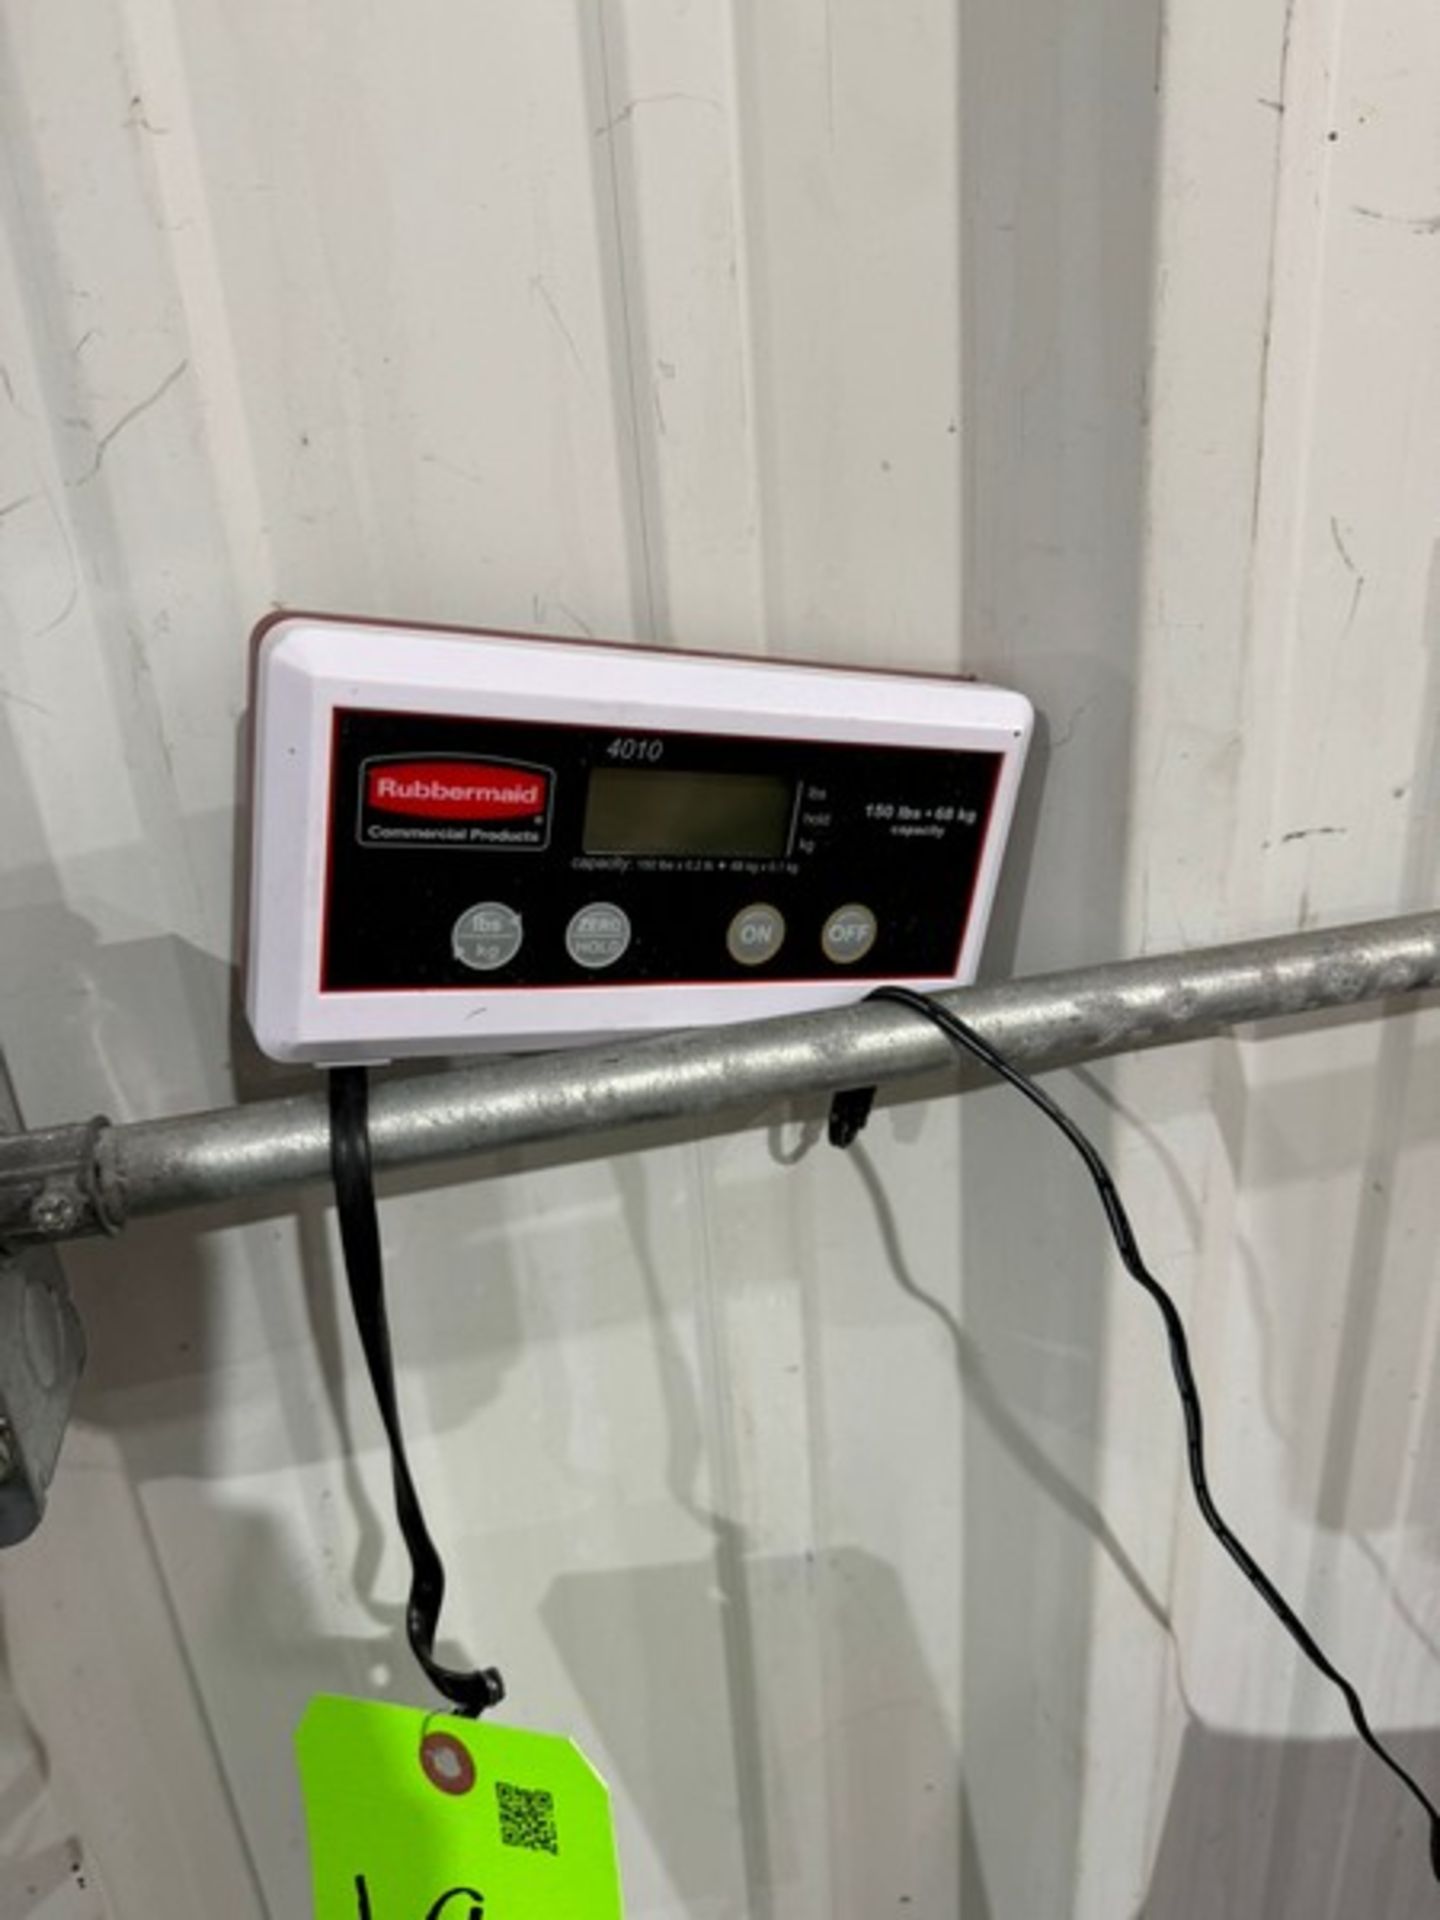 Rubbermaid Digital Platform Scale, with Digital Read Out, 150 lbs. Capacity (LOCATED IN MOUNT - Image 3 of 3